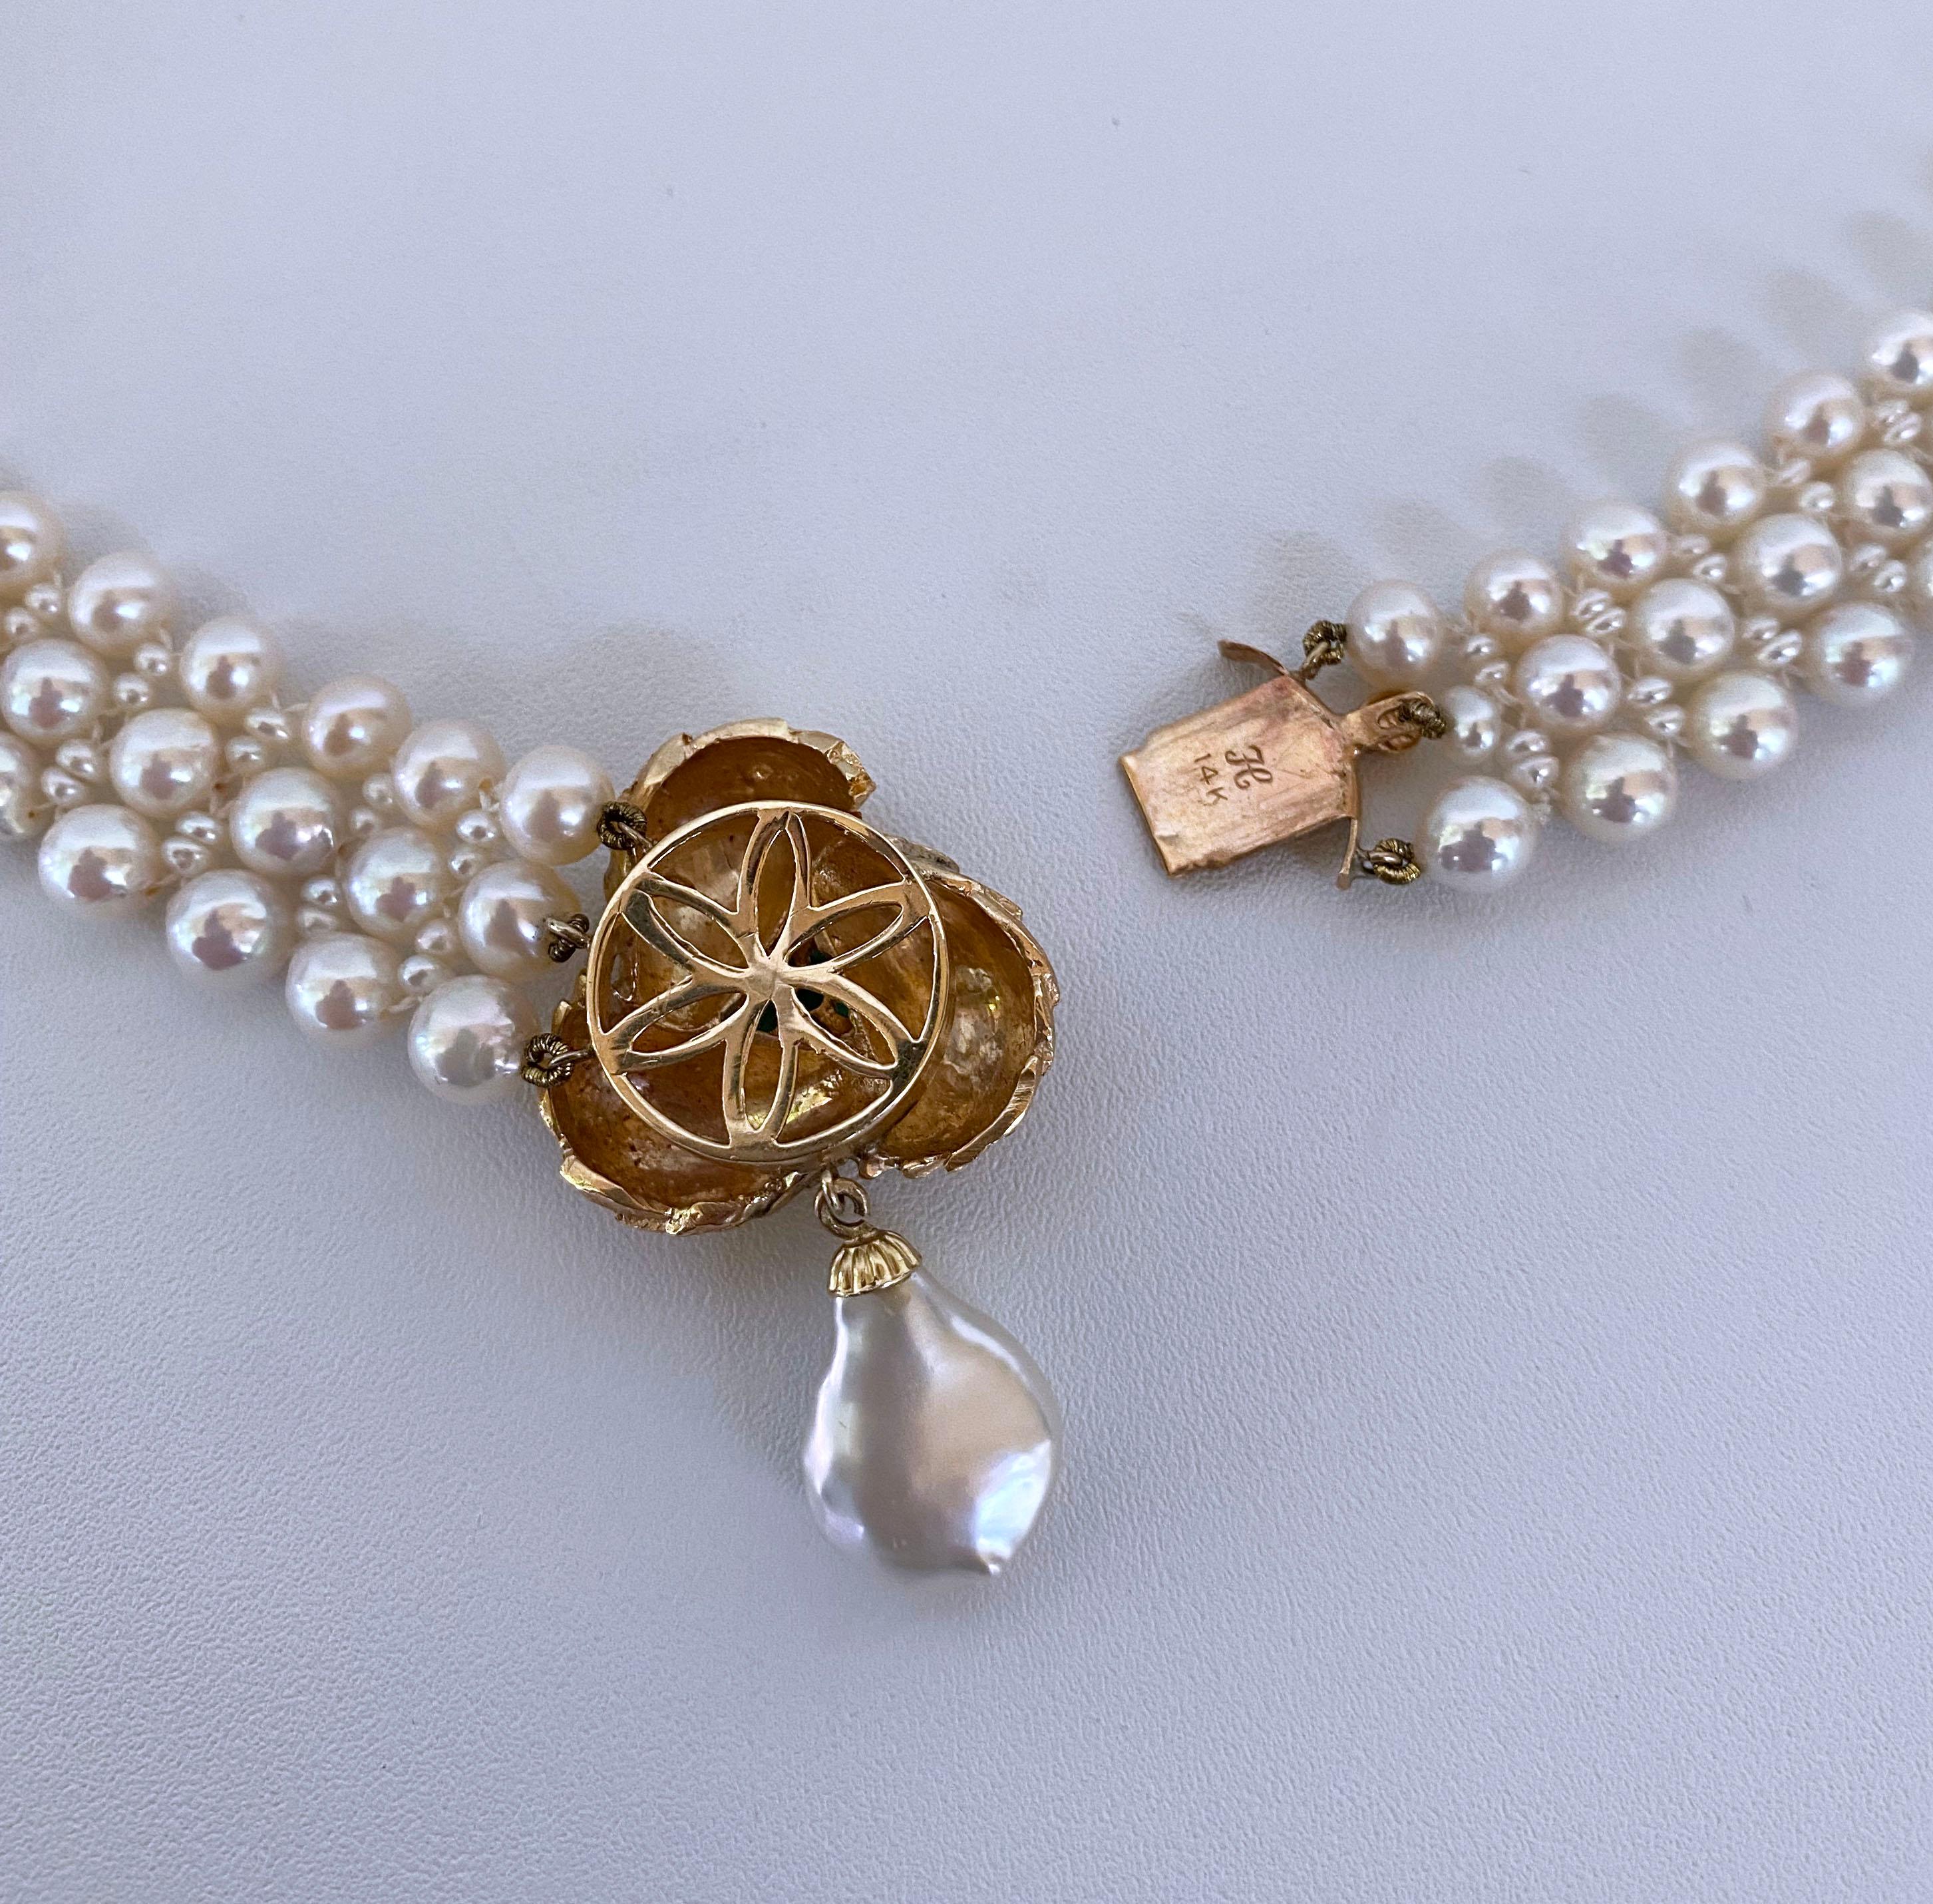 pearl necklace with gold clasp in front